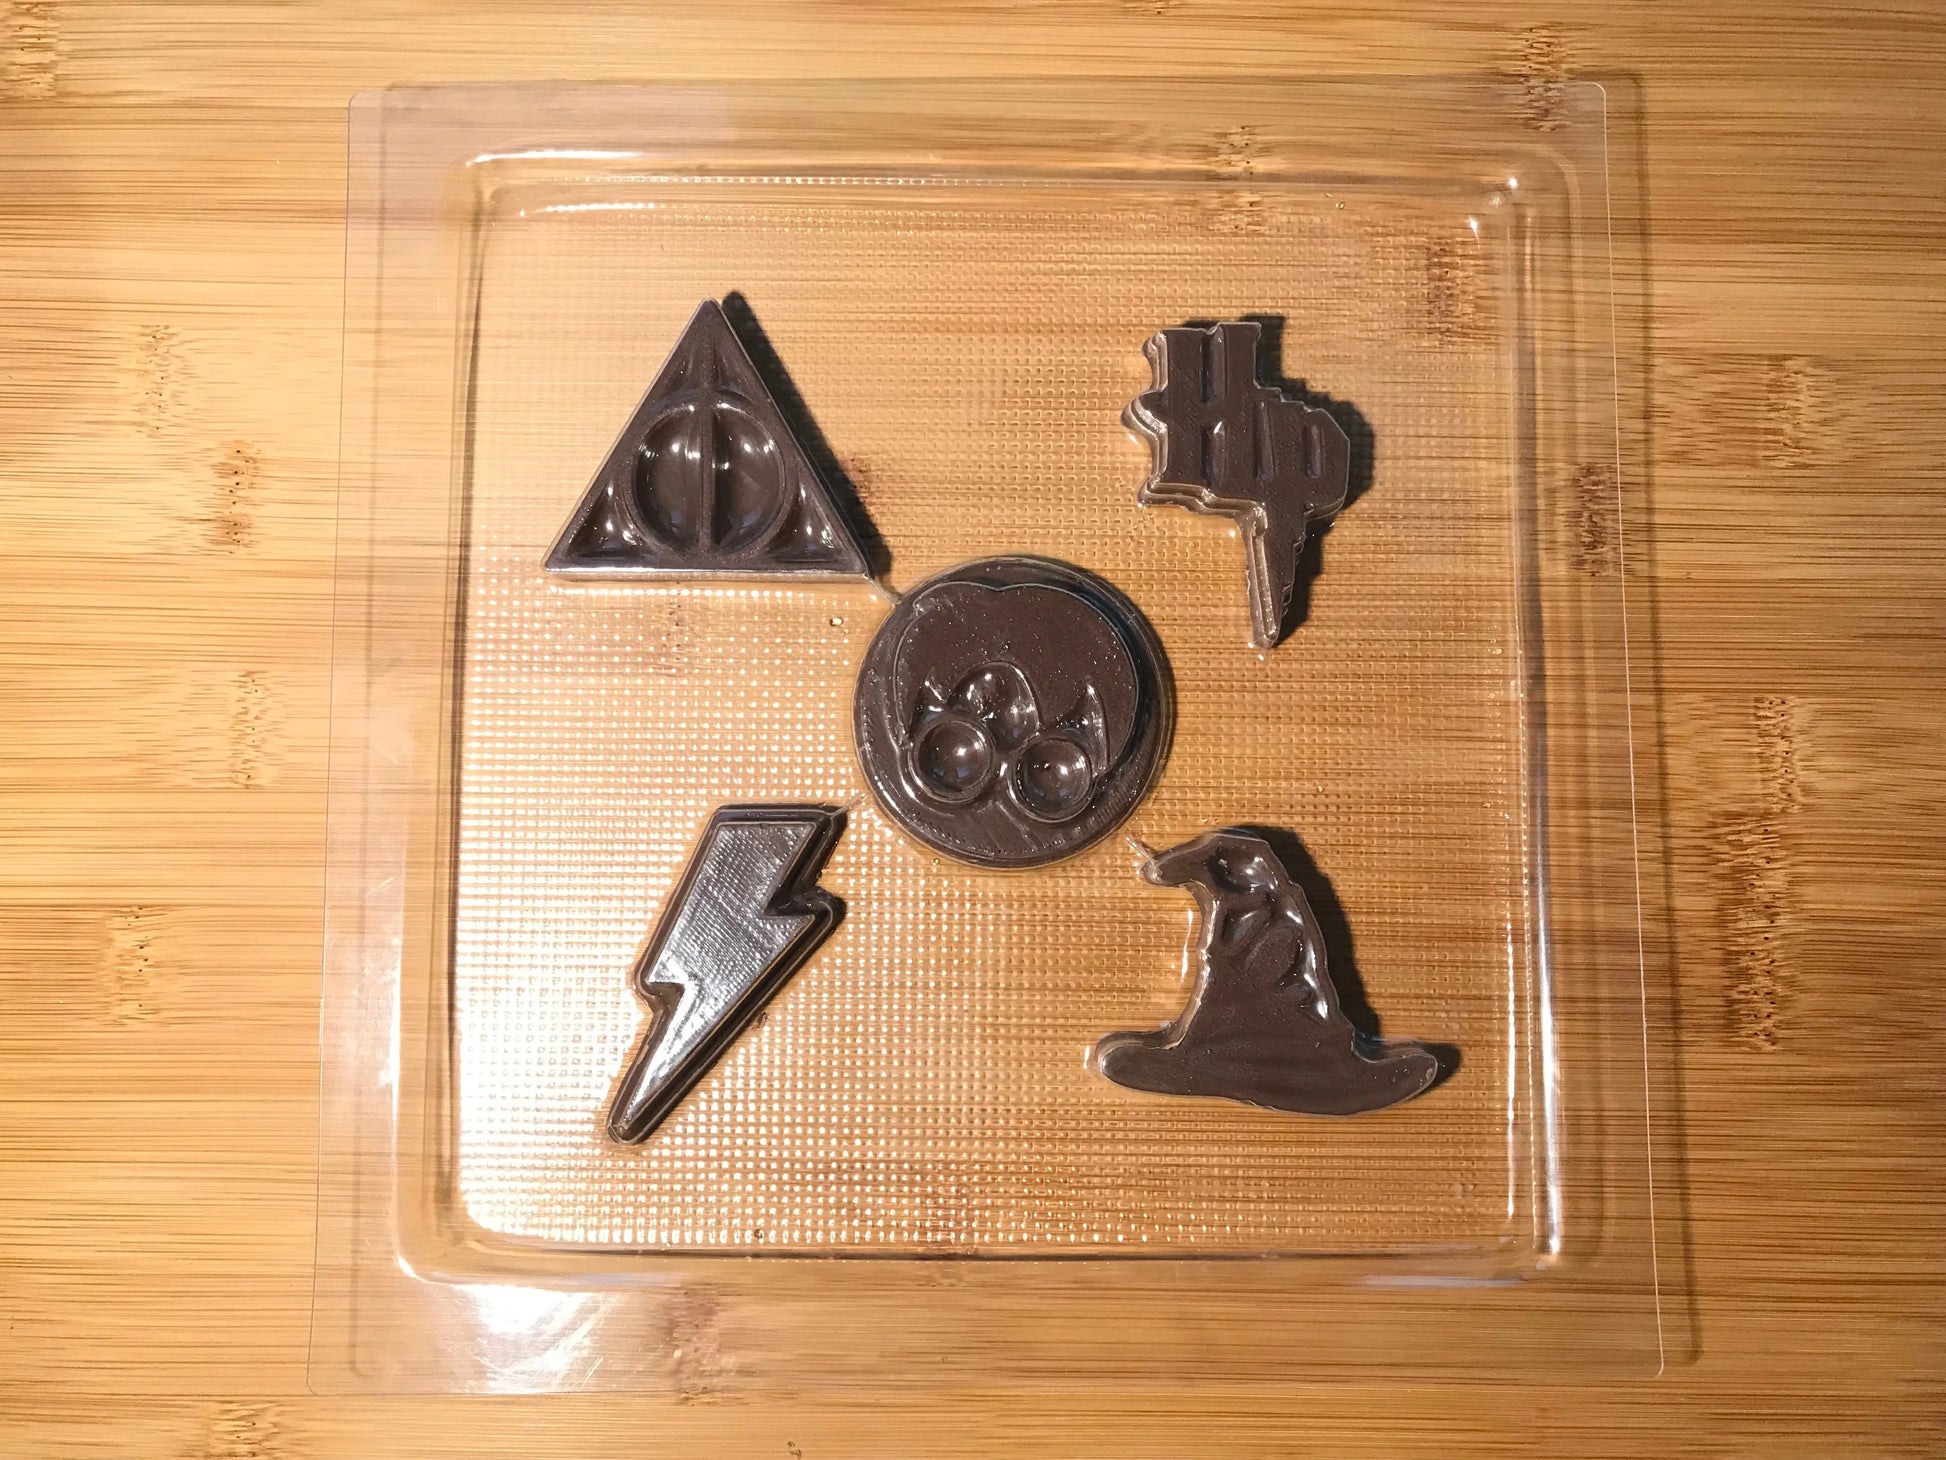 Harry Potter-inspired chocolate mould MEG cookie cutters